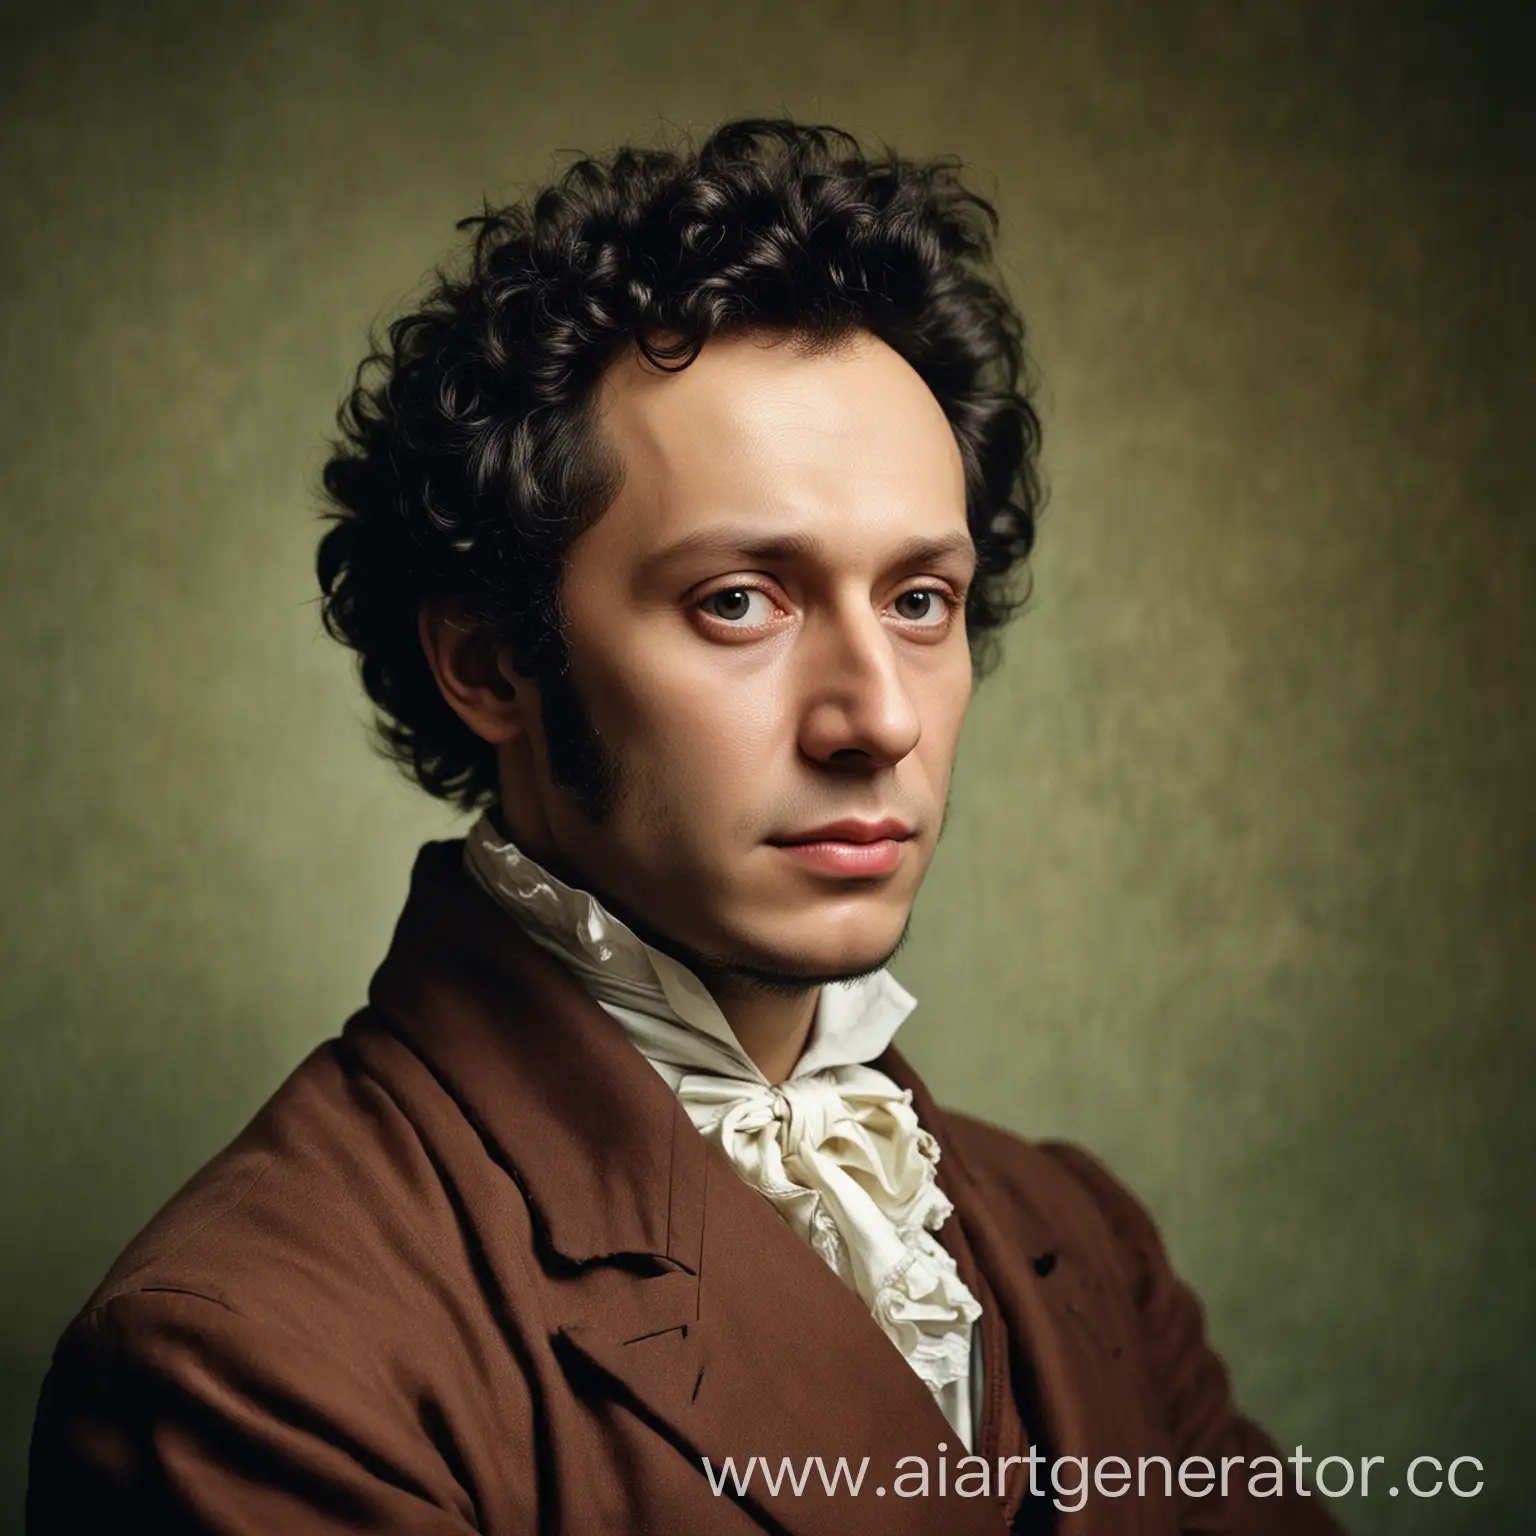 Vintage-Portrait-of-AS-Pushkin-with-Copy-Space